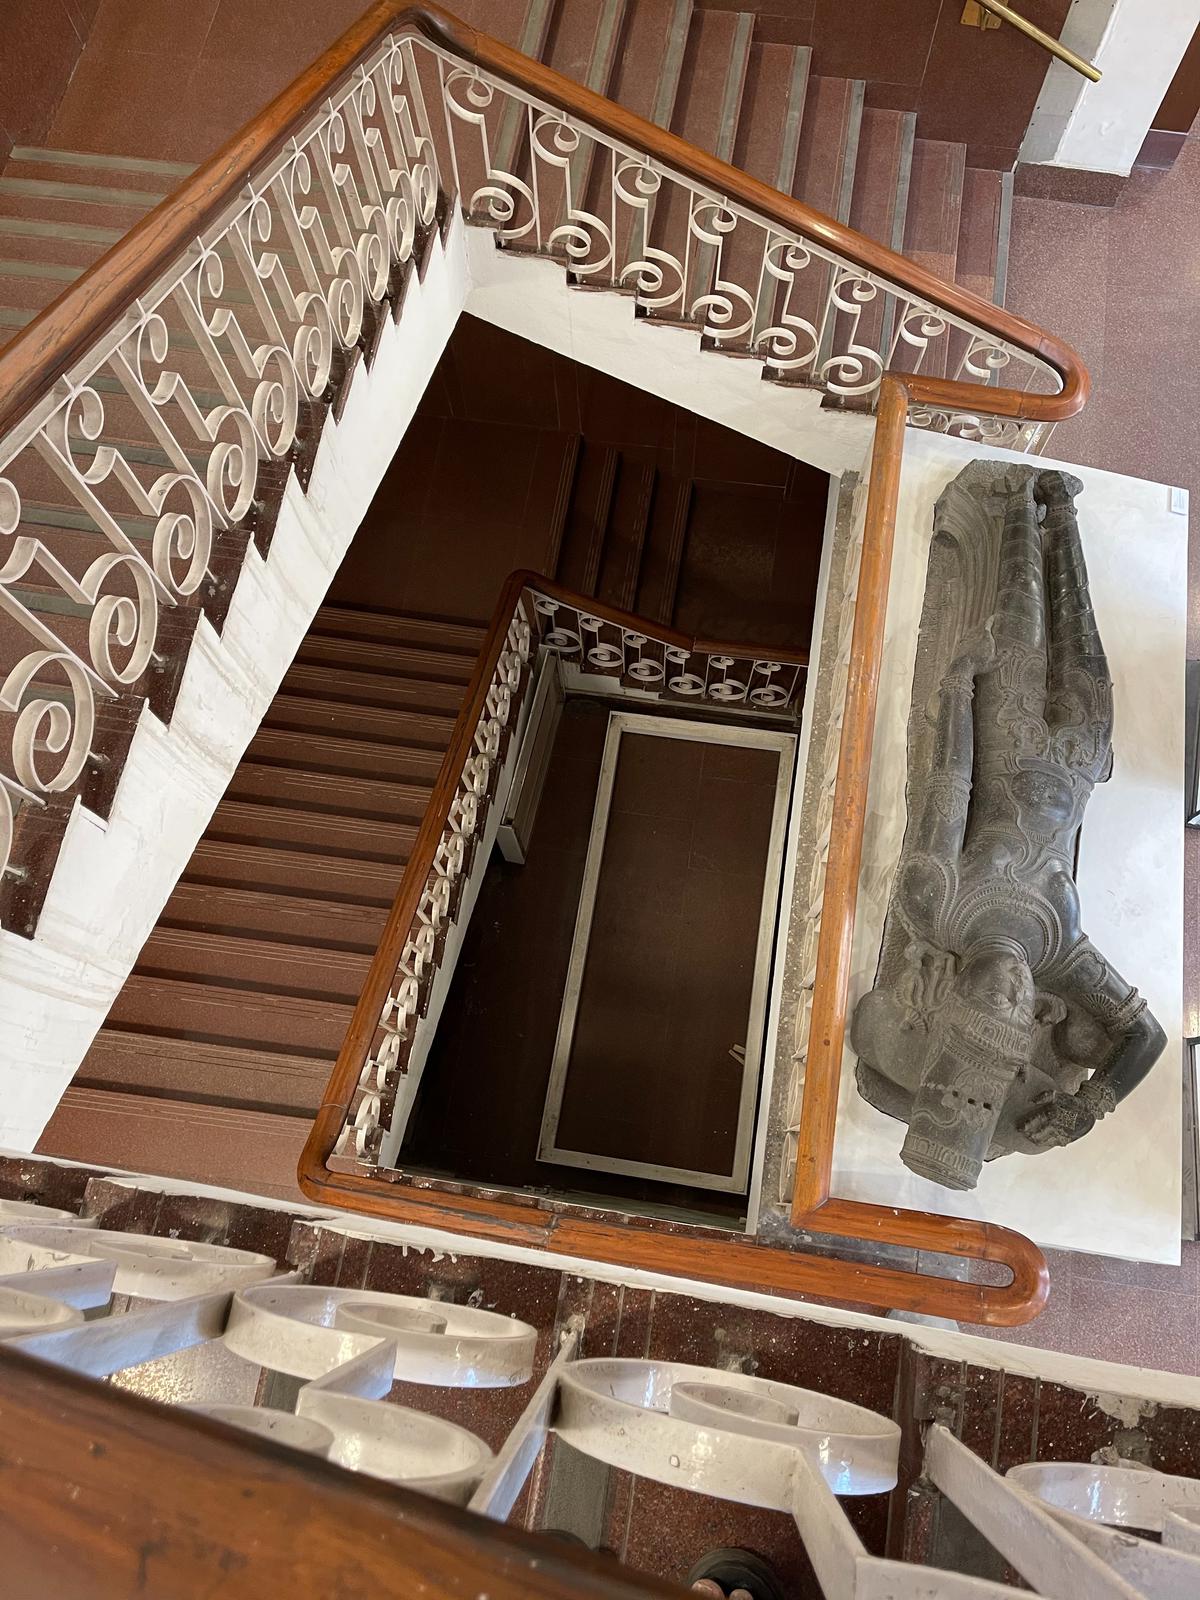 Staircase detail, with a Vishnu sculpture on the landing